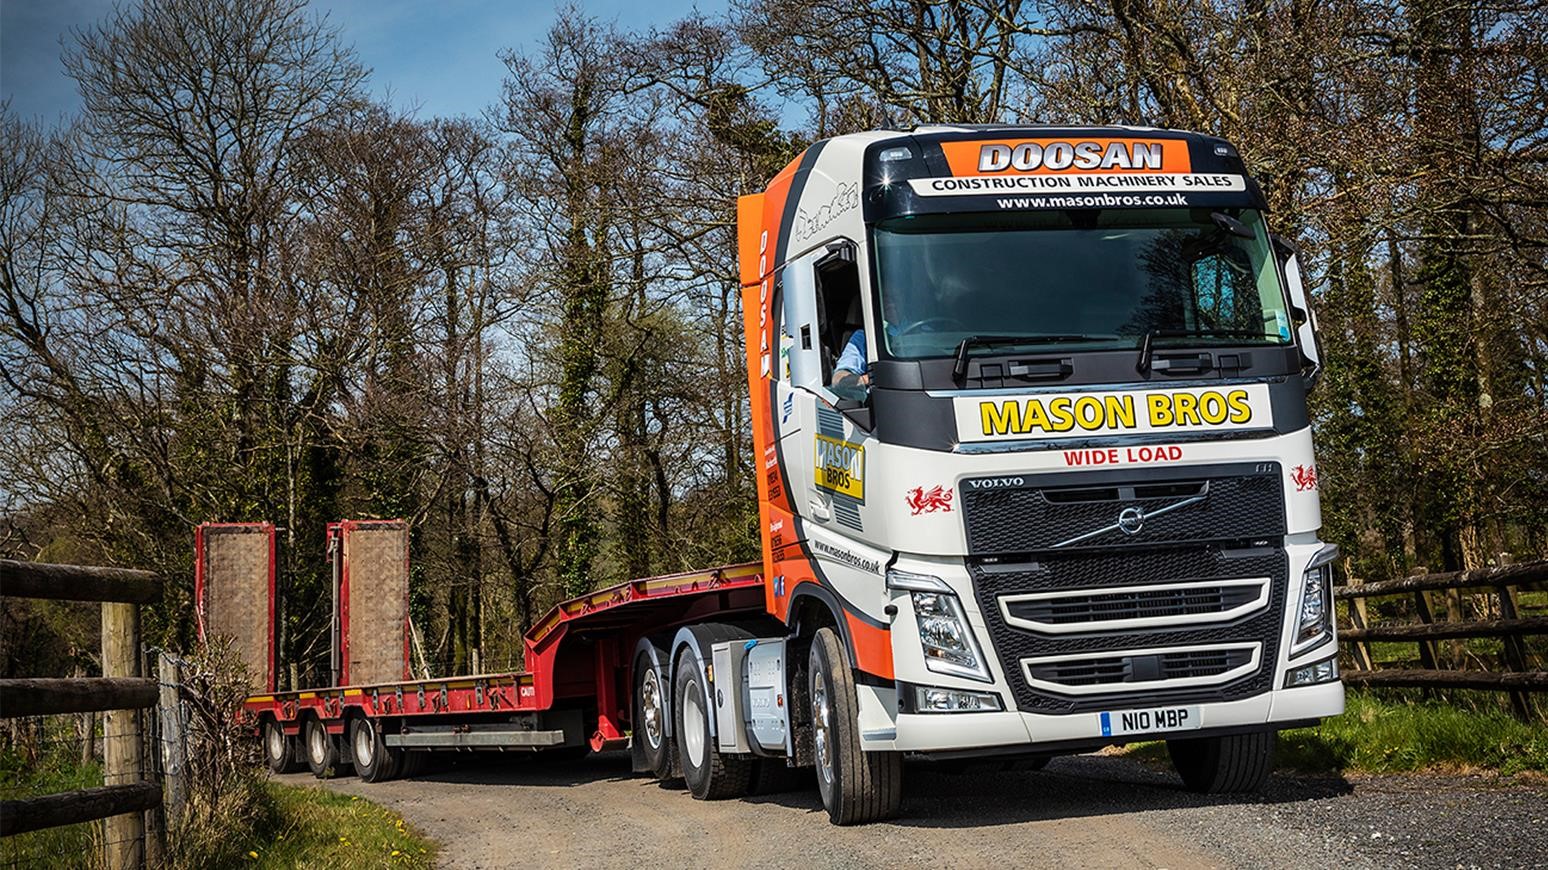 Welsh Plant Machinery Dealer Mason Bros Buys New Volvo FH-540 Truck On A Quick Turnaround